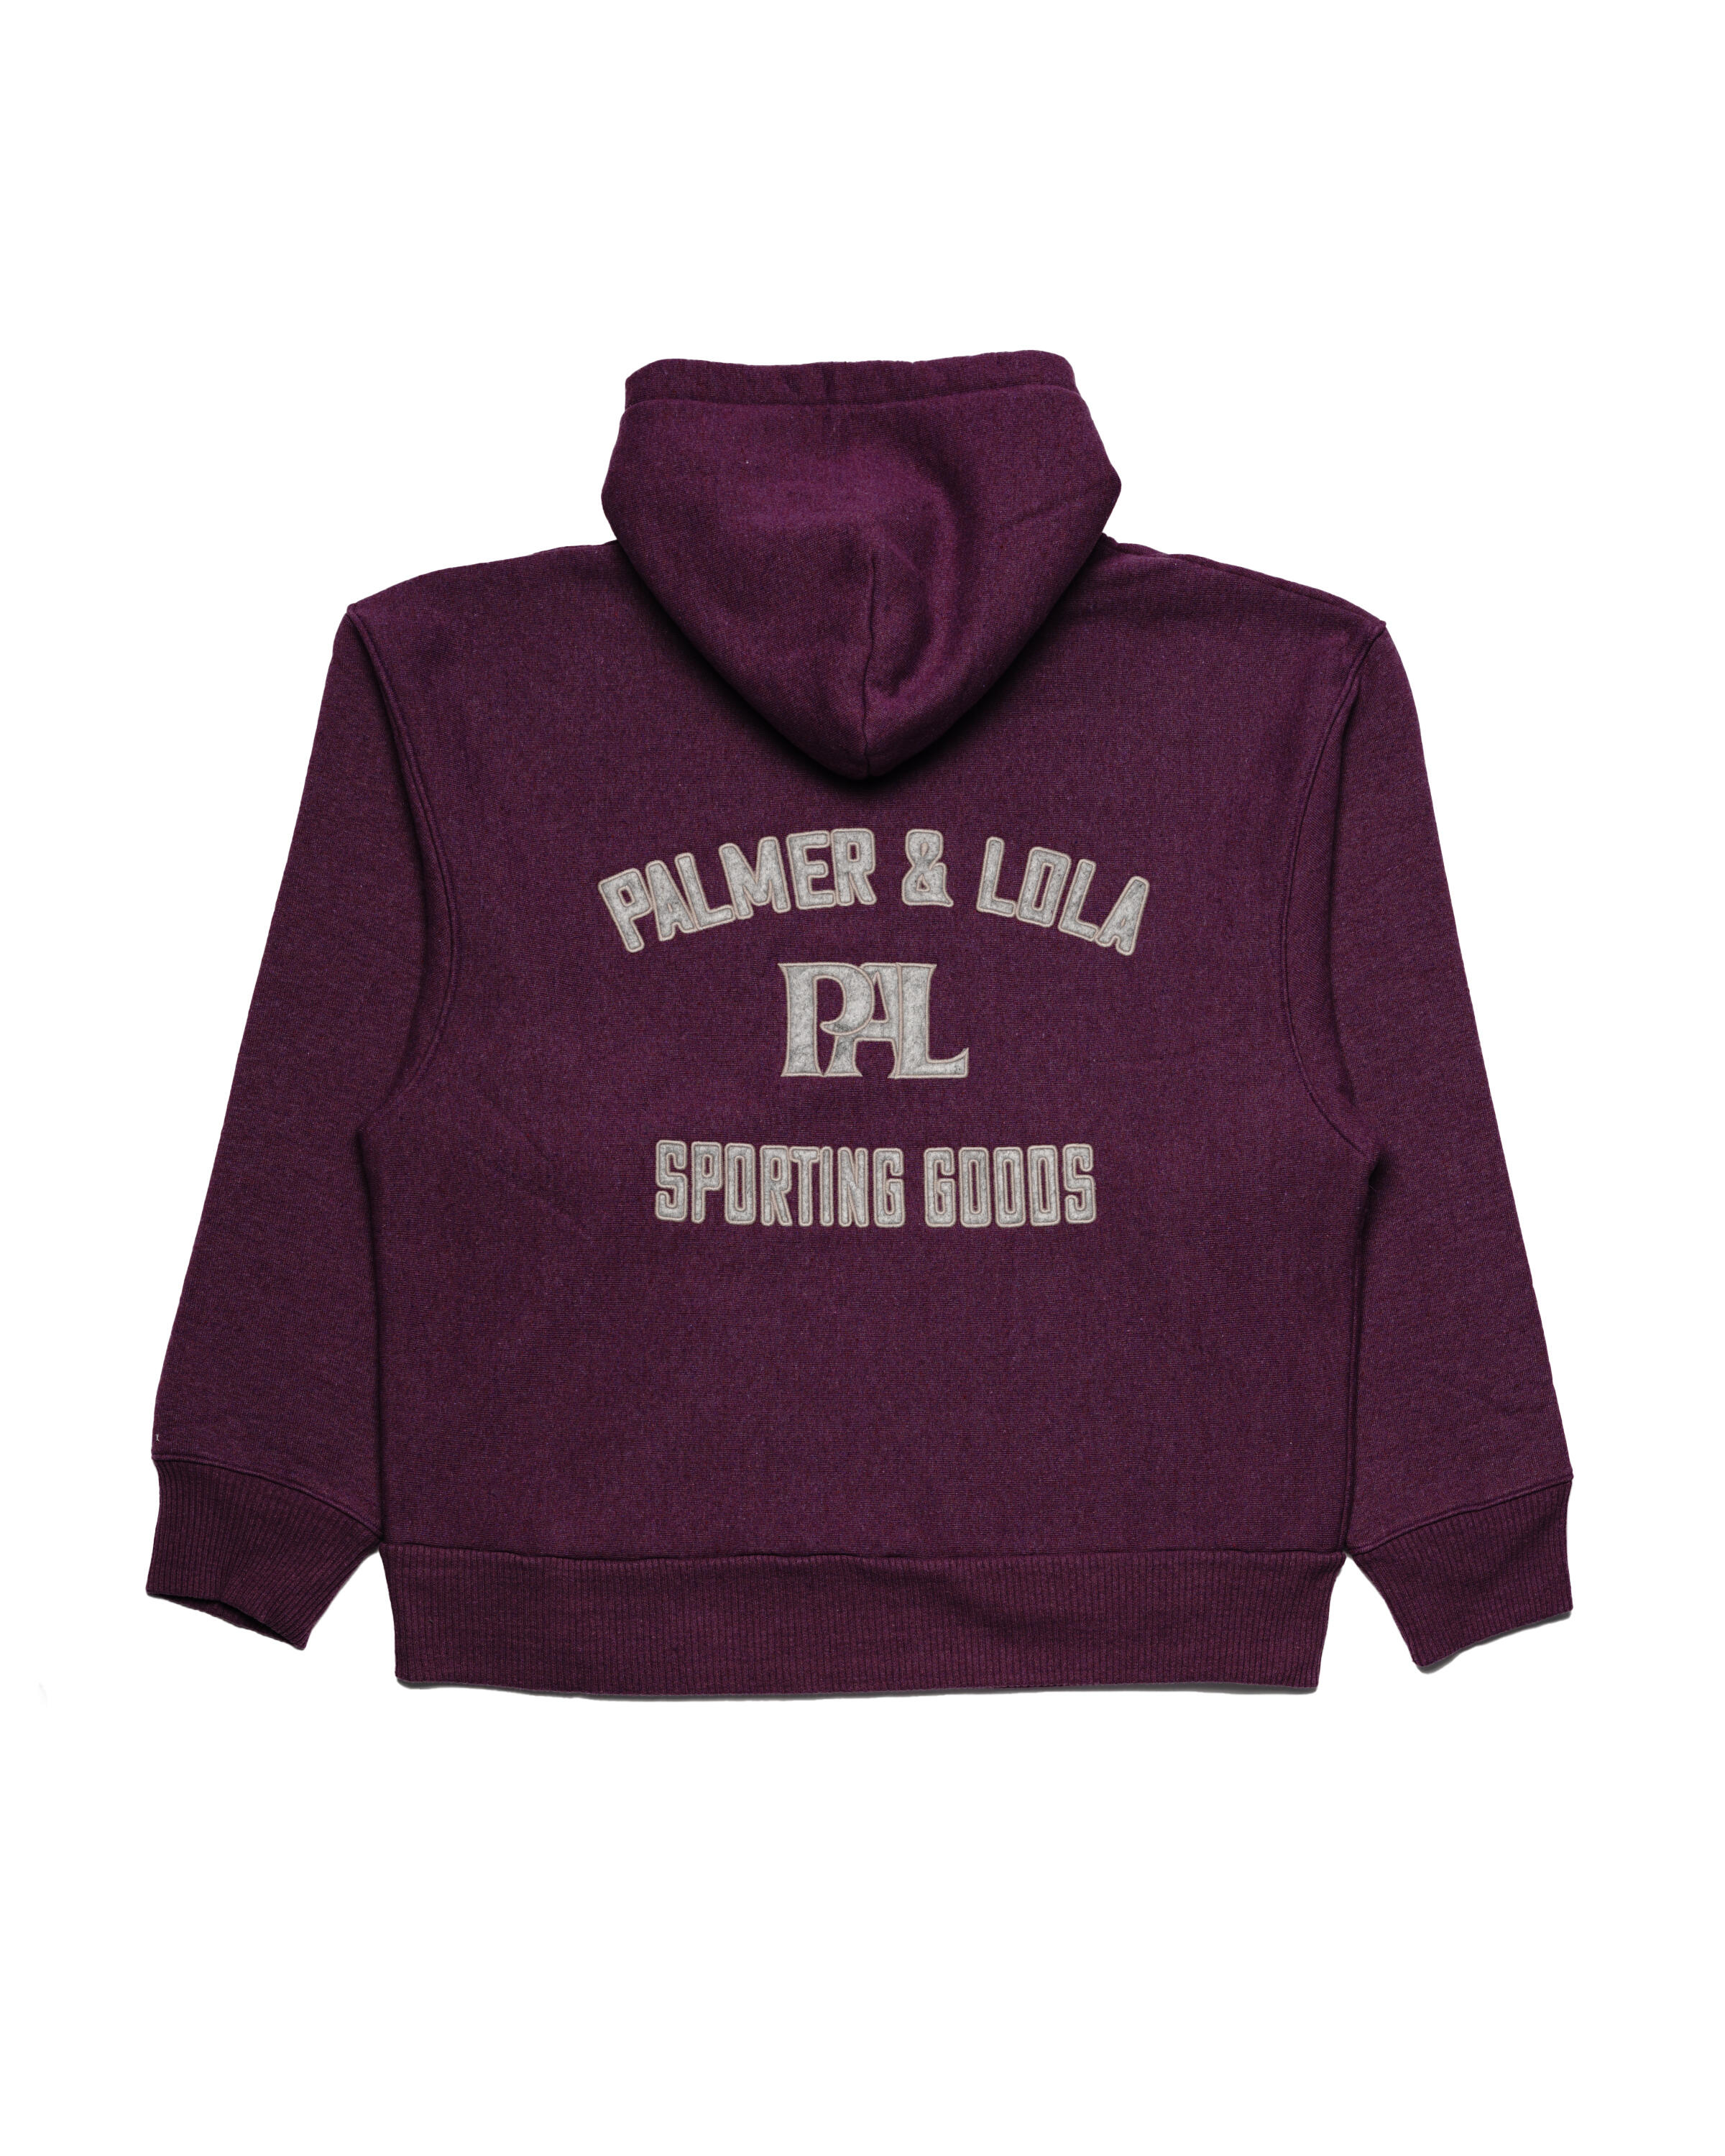 PAL Sporting Goods New Arch Logo Hoodie